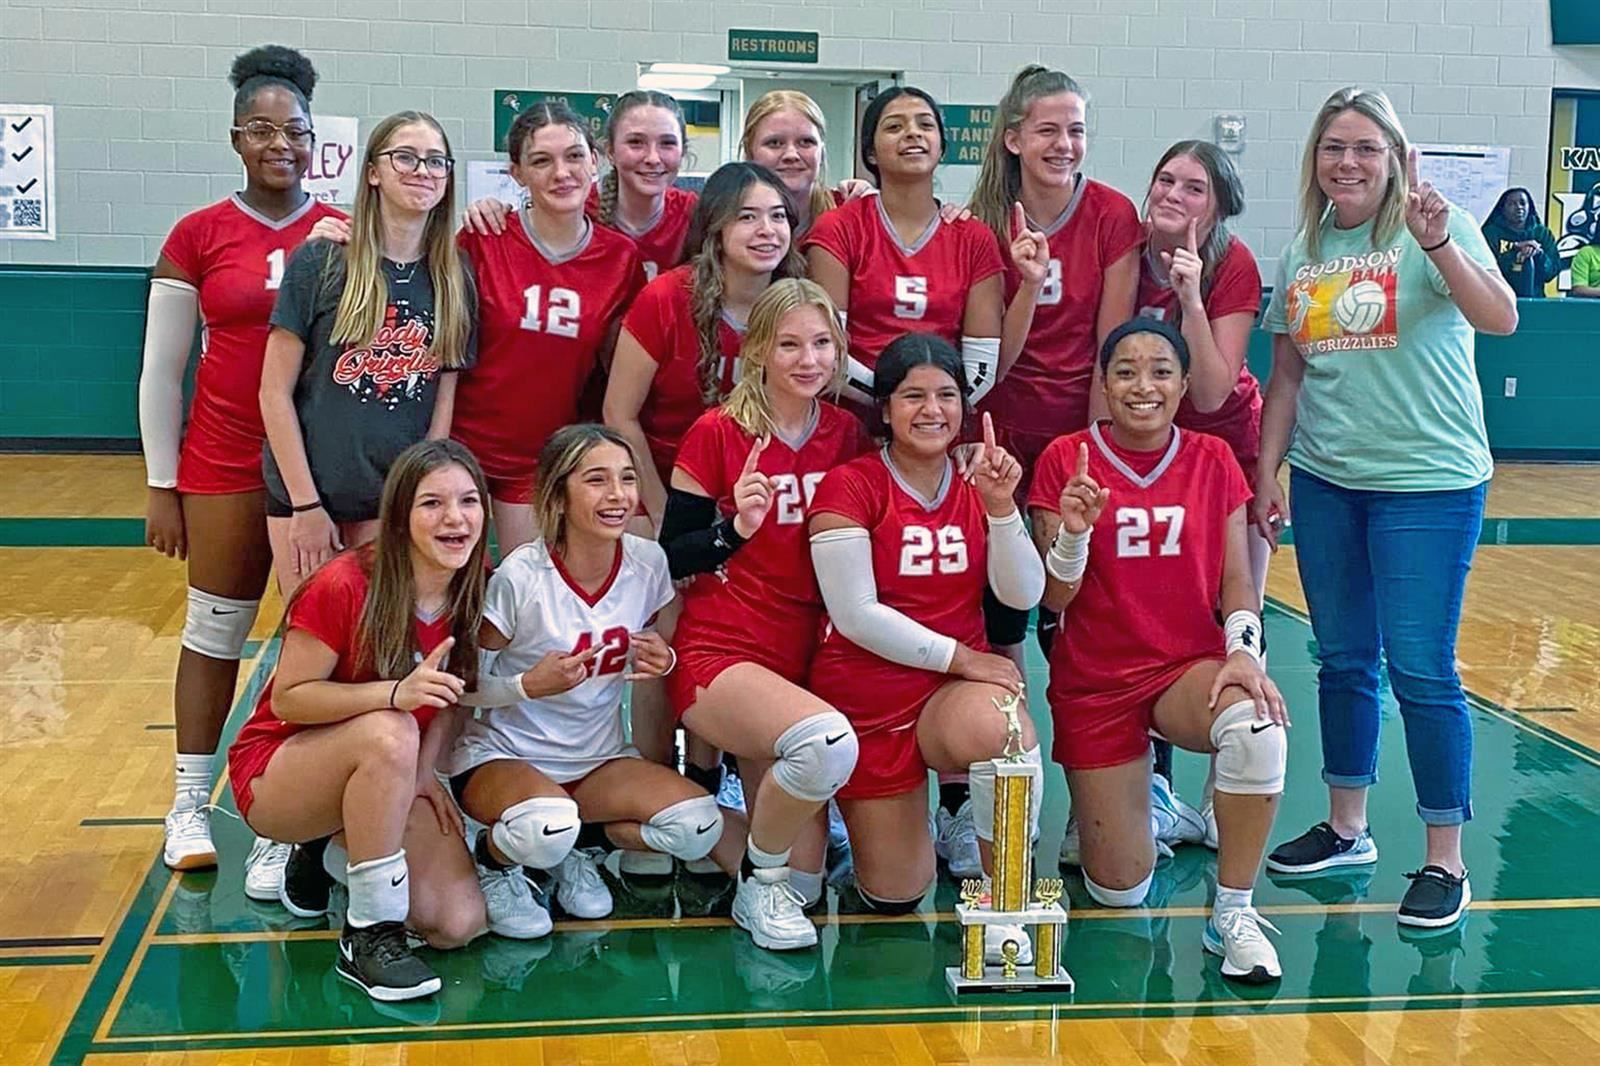 The Goodson eighth grade volleyball B team poses after winning the CFISD Middle School “B” Volleyball Tournament.